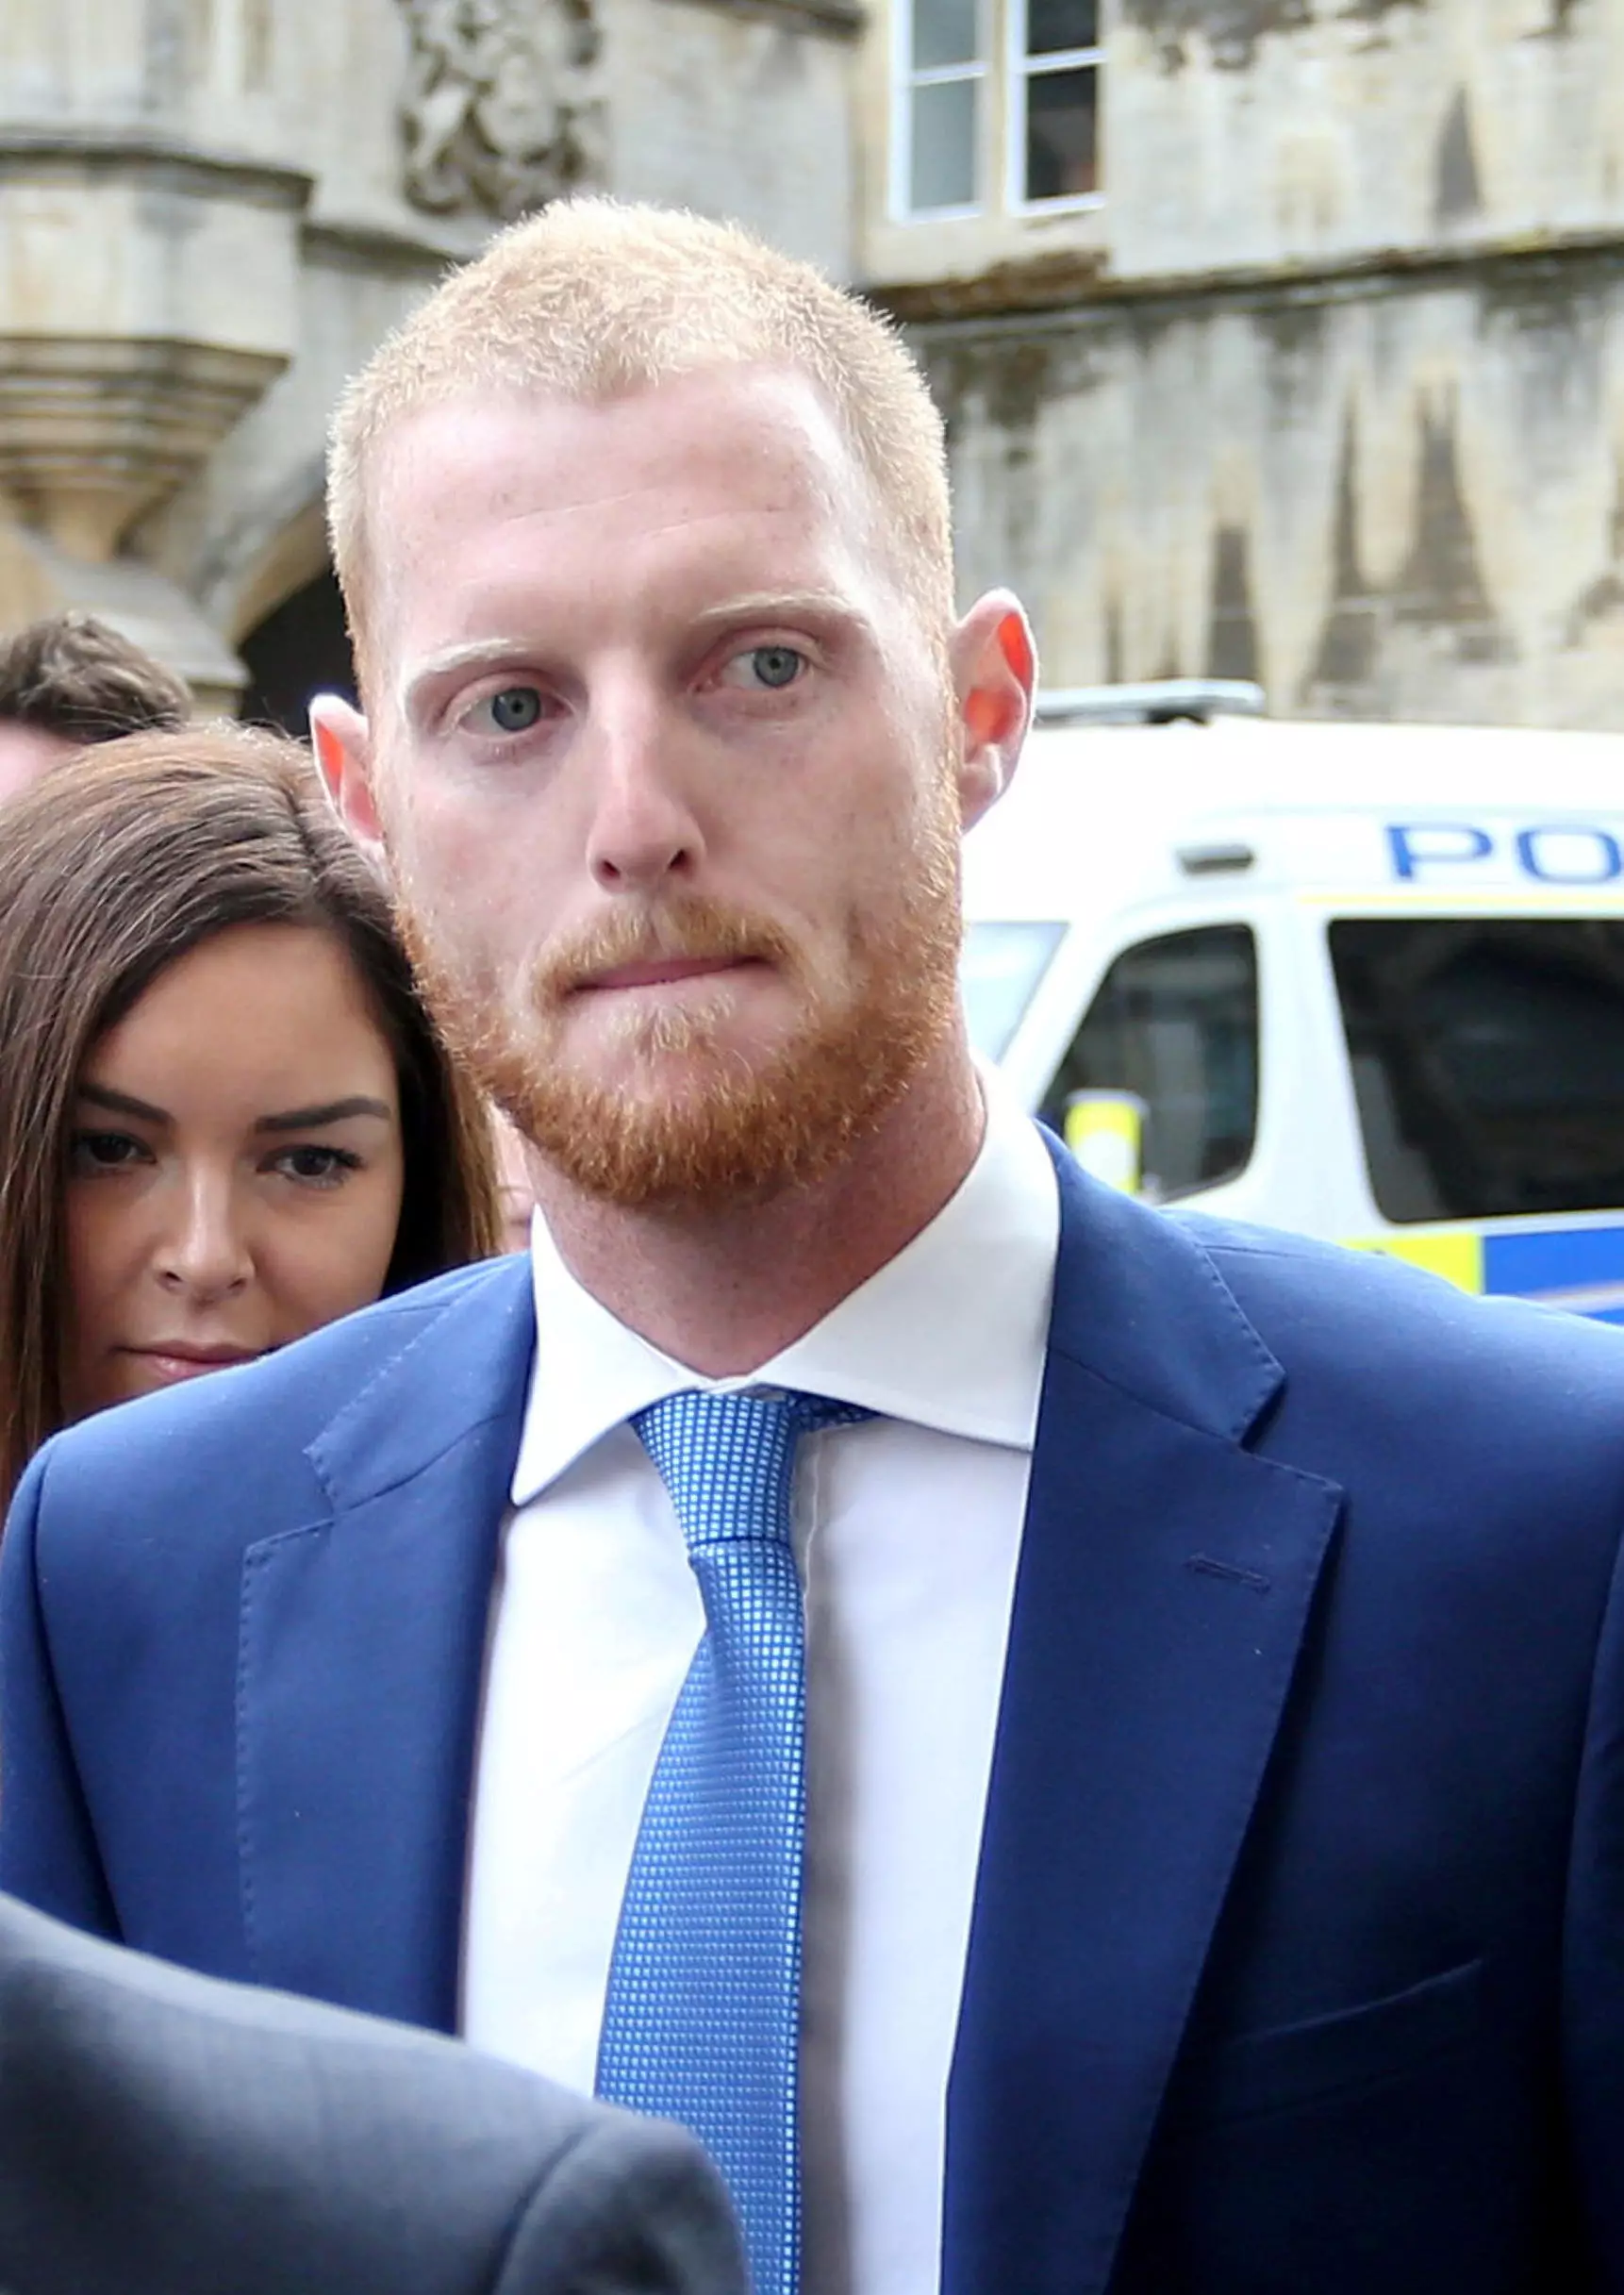 Ben Stokes was defending two gay men who were being abused at the time.